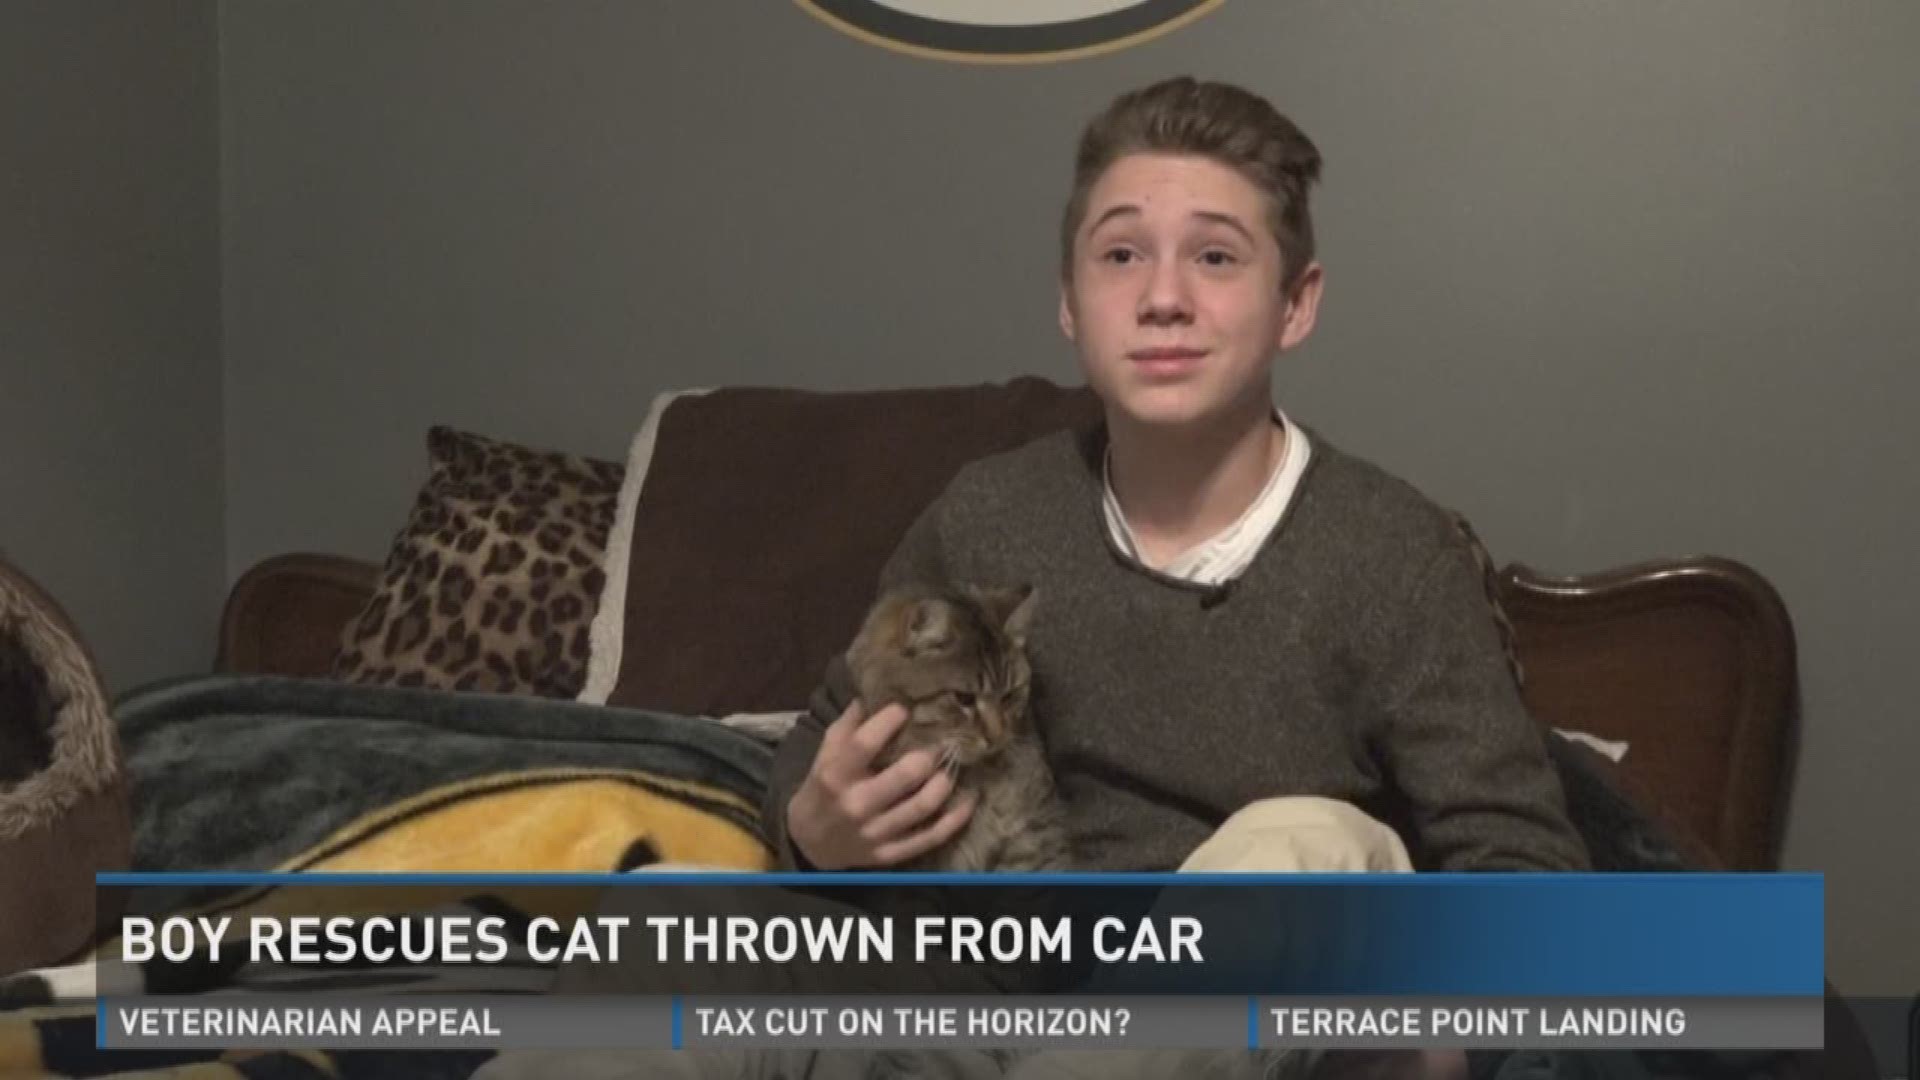 Boy rescues cat thrown from car